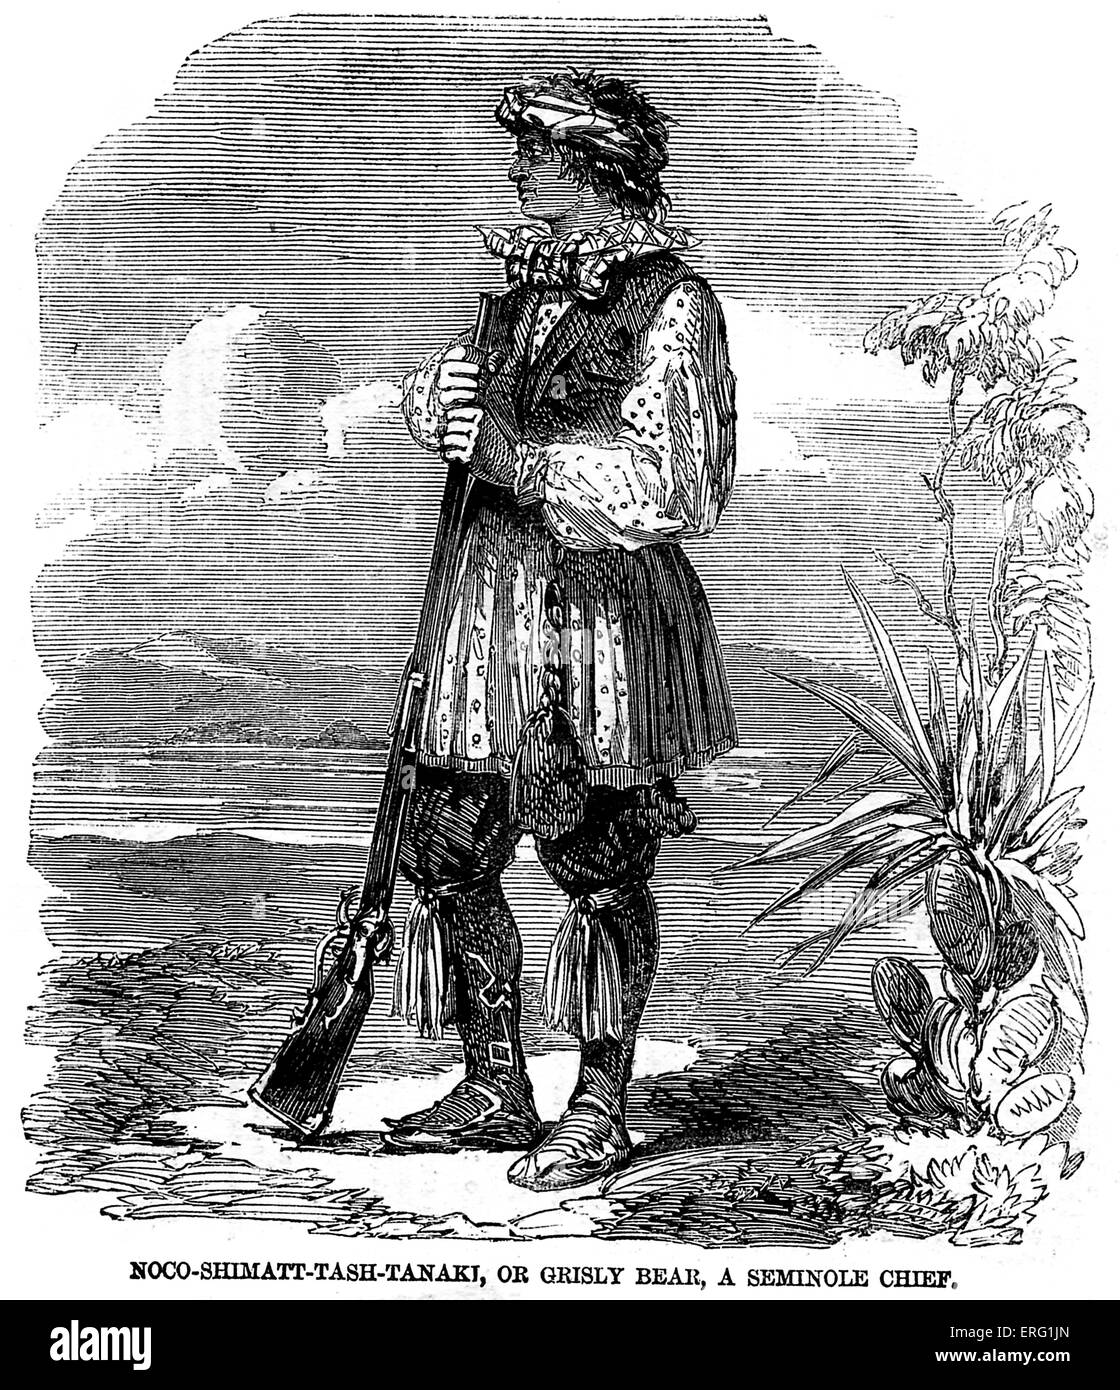 Noo-Shimatt-Tash-Tanaki, or Grisly Bear, a Seminole Chief 1858 . Lived in the prairies west of Arkansas River. (Indians of the Stock Photo